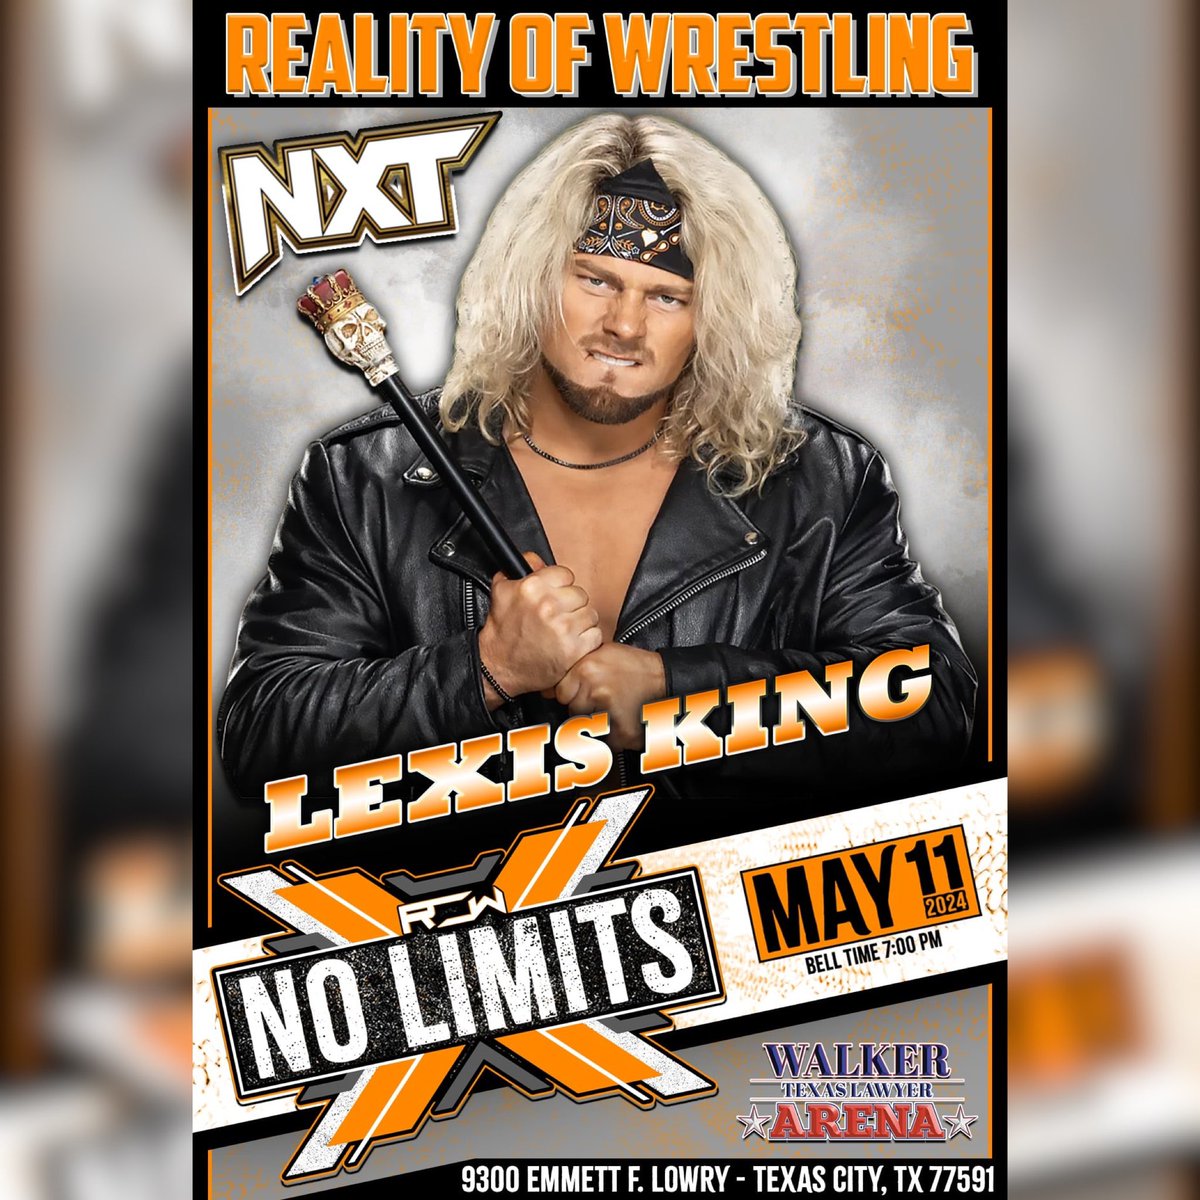 ‼️ BREAKING NEWS ‼️ We’re excited to announce @WWENXT Superstar @LexisKingWWE will be in action on Saturday, May 11th in Texas City, Tx at the Walker Texas Lawyer Arena! #NoLimits 📍9300 Emmett F Lowry Expressway Texas City, TX 77591 🎫 shorturl.at/bpvy0